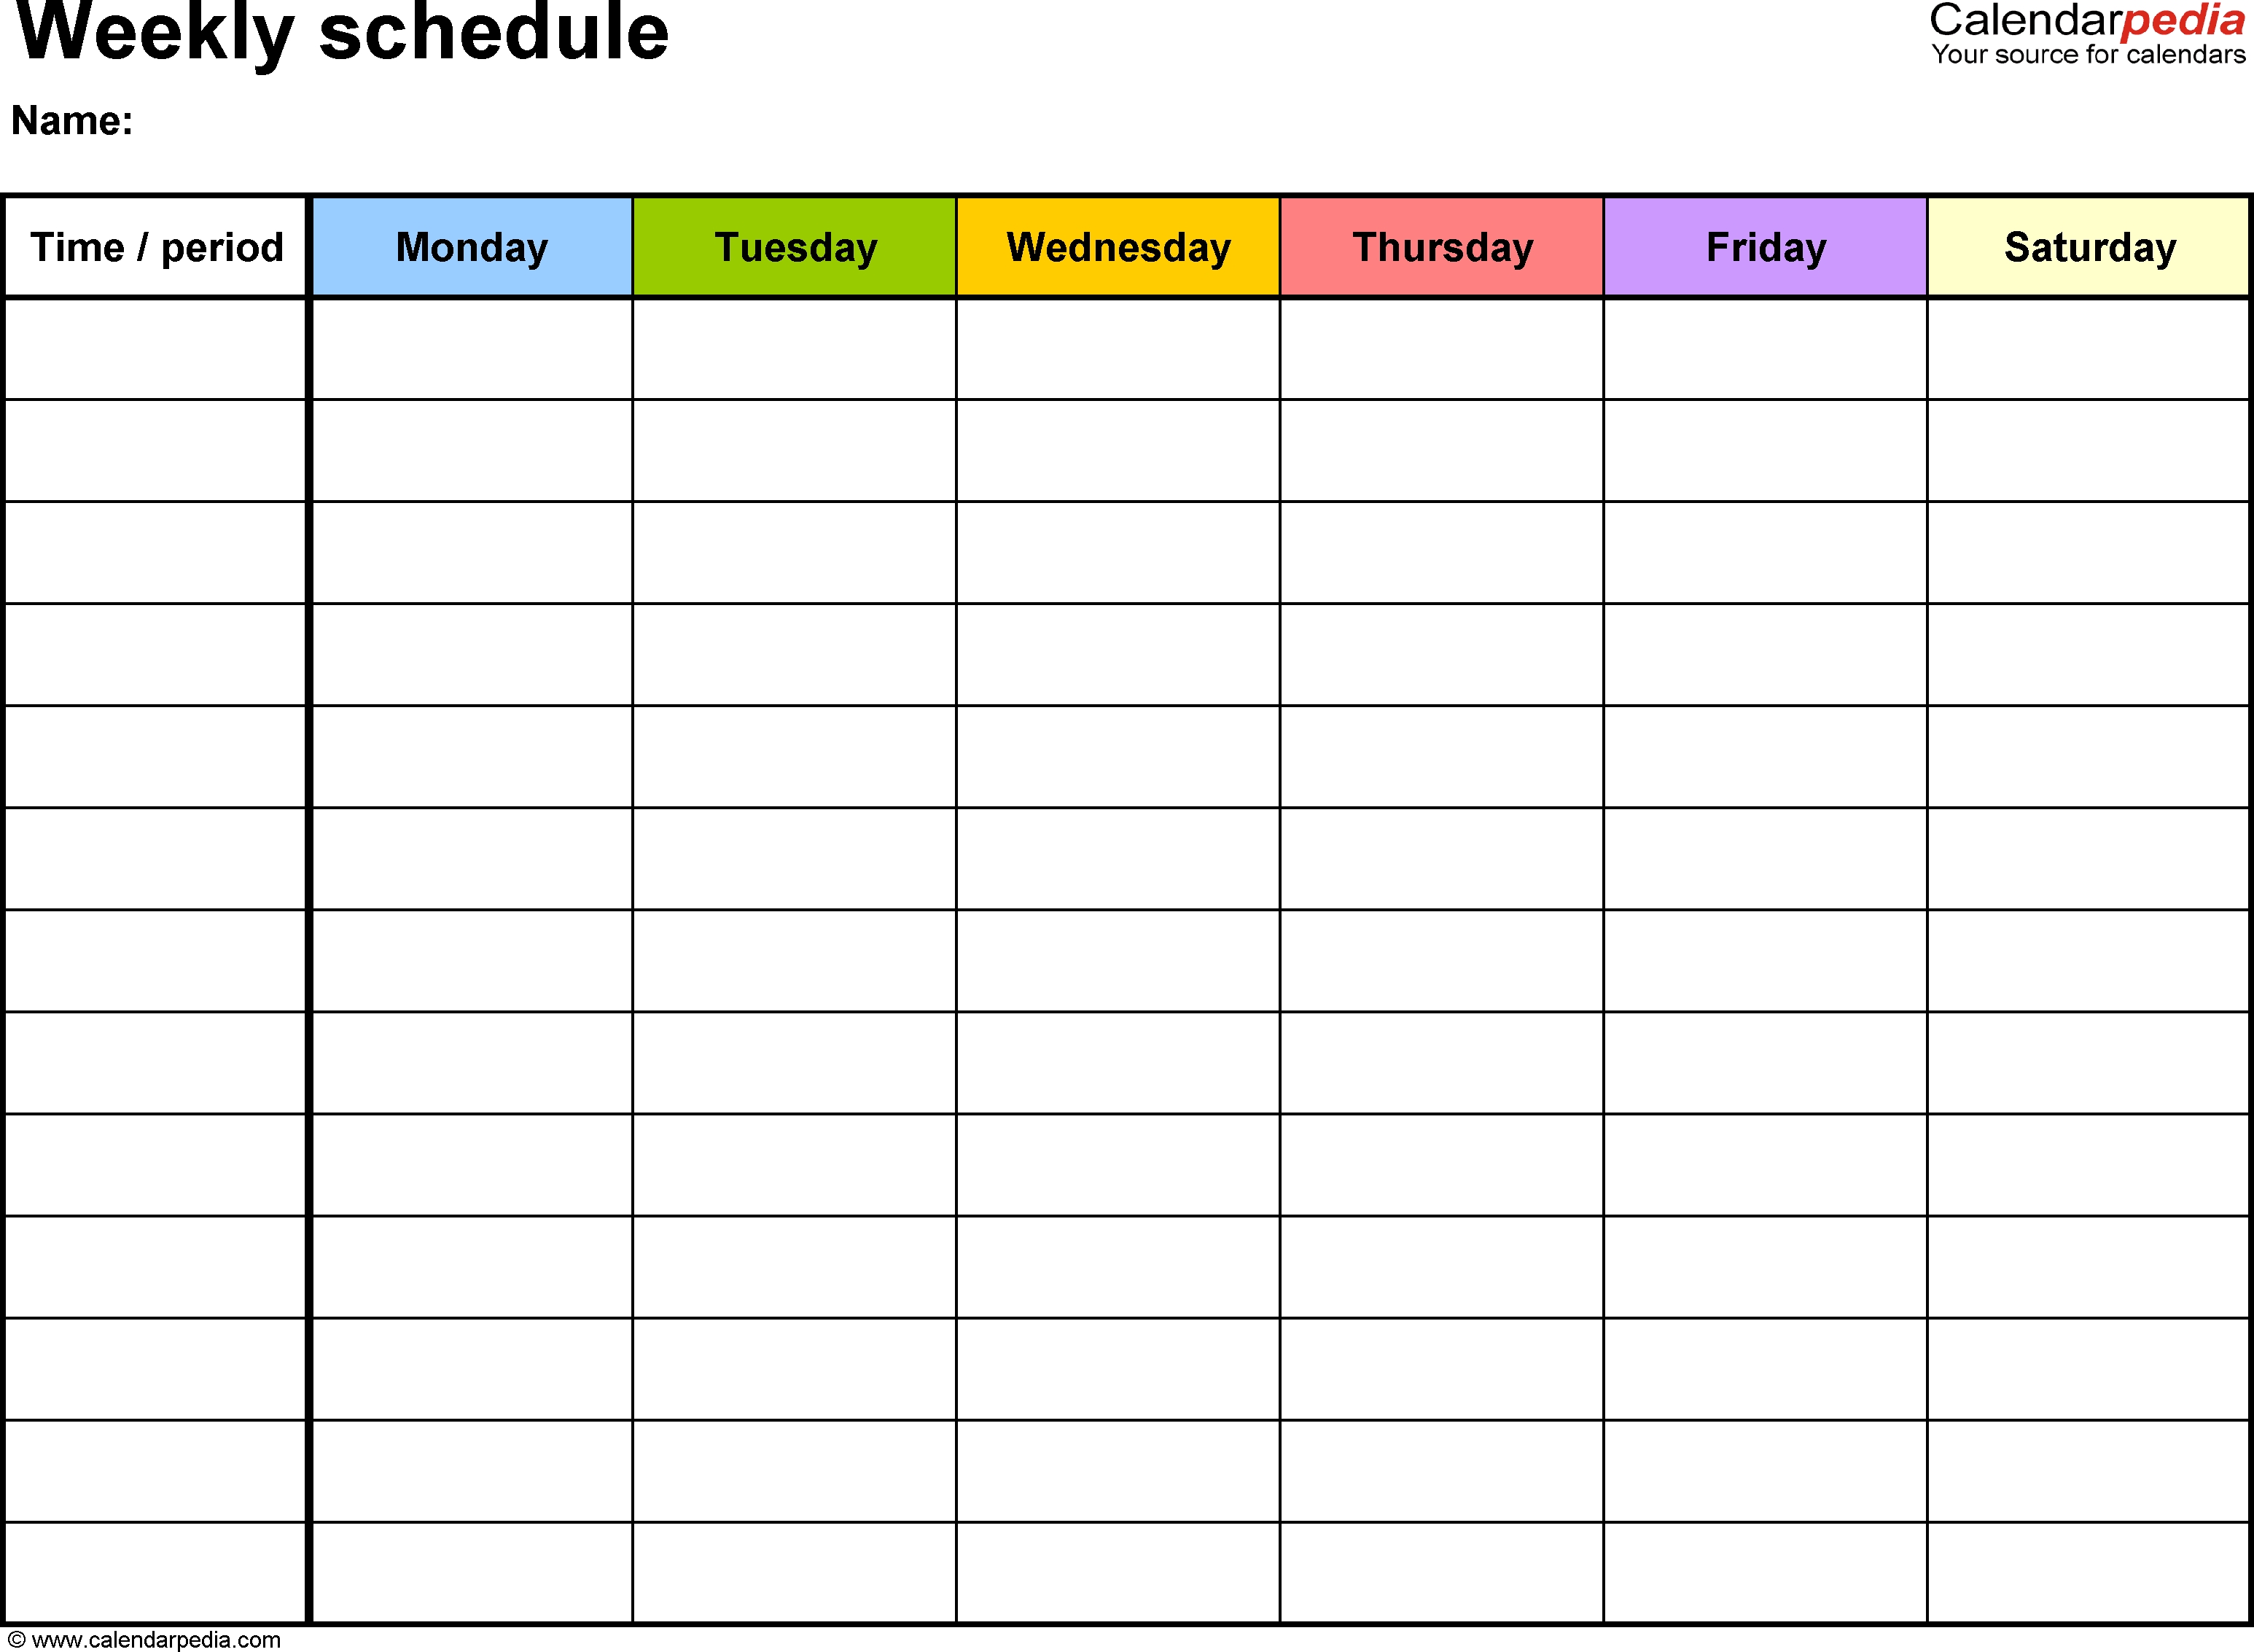 Free Weekly Schedule Templates For Word - 18 Templates-Blank Monday Through Friday Template